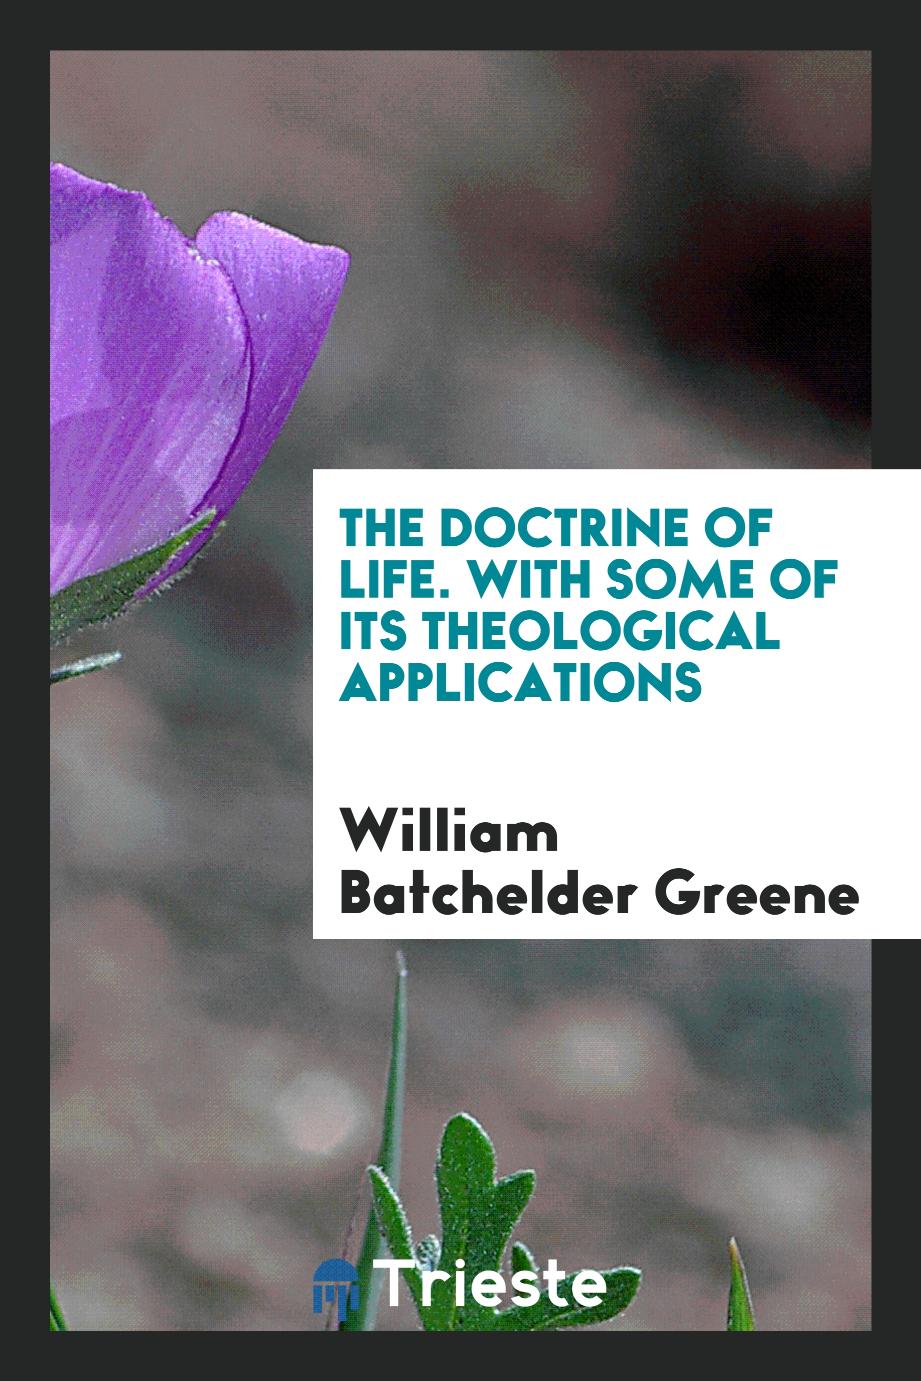 The doctrine of life. with some of its theological applications